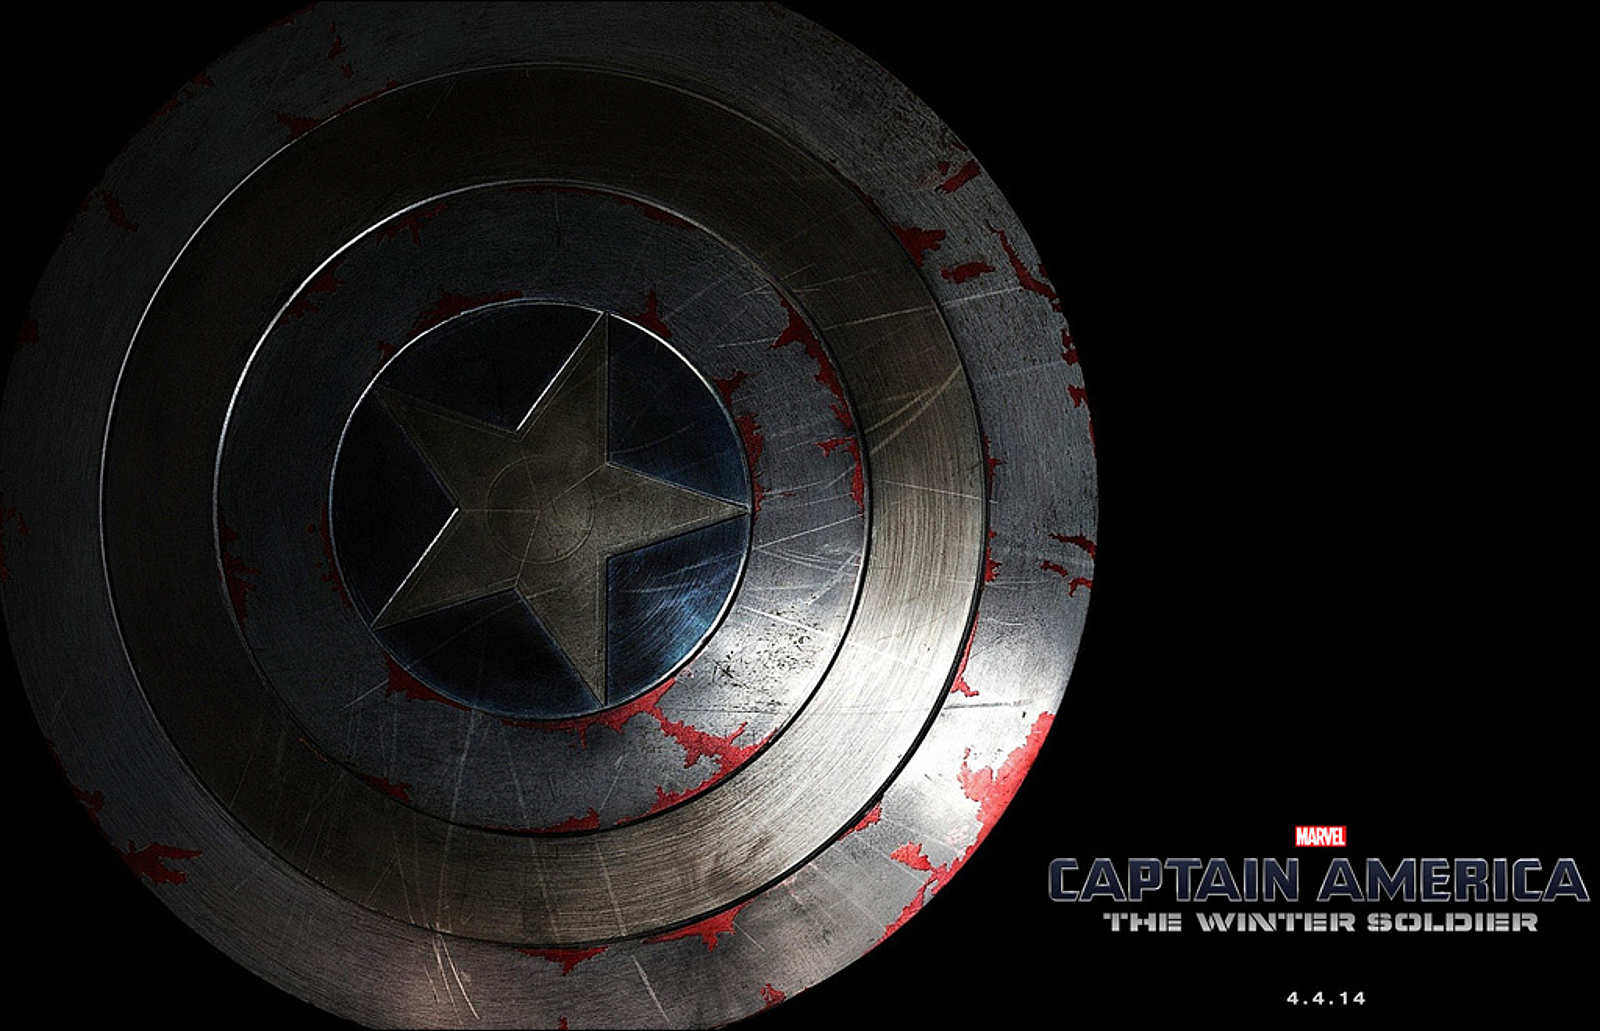 Captain America: The Winter Soldier. A Writer's Discrepant Memoirs and Other Tales